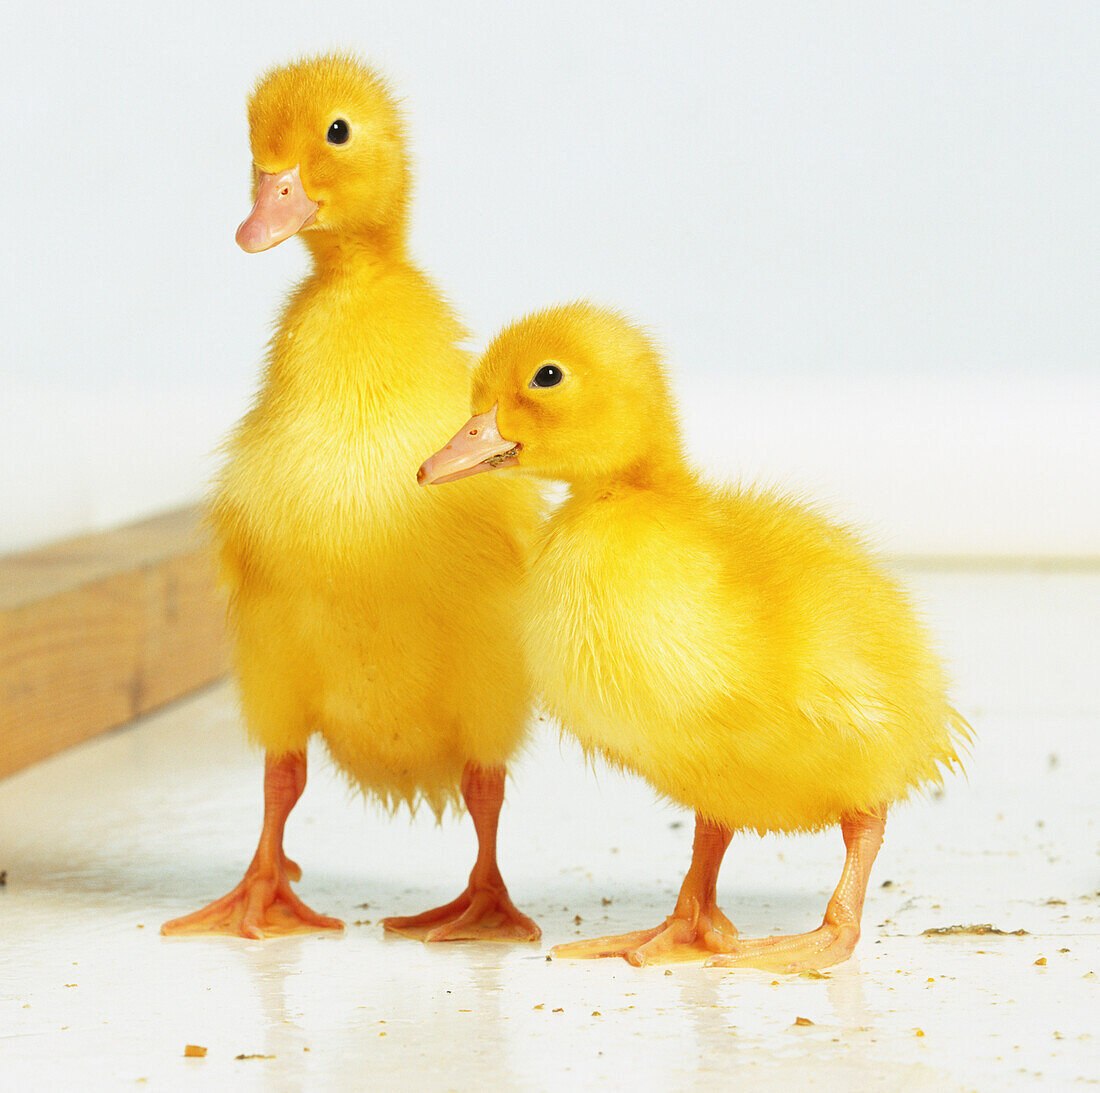 Two yellow ducklings (Anseriformes) standing together